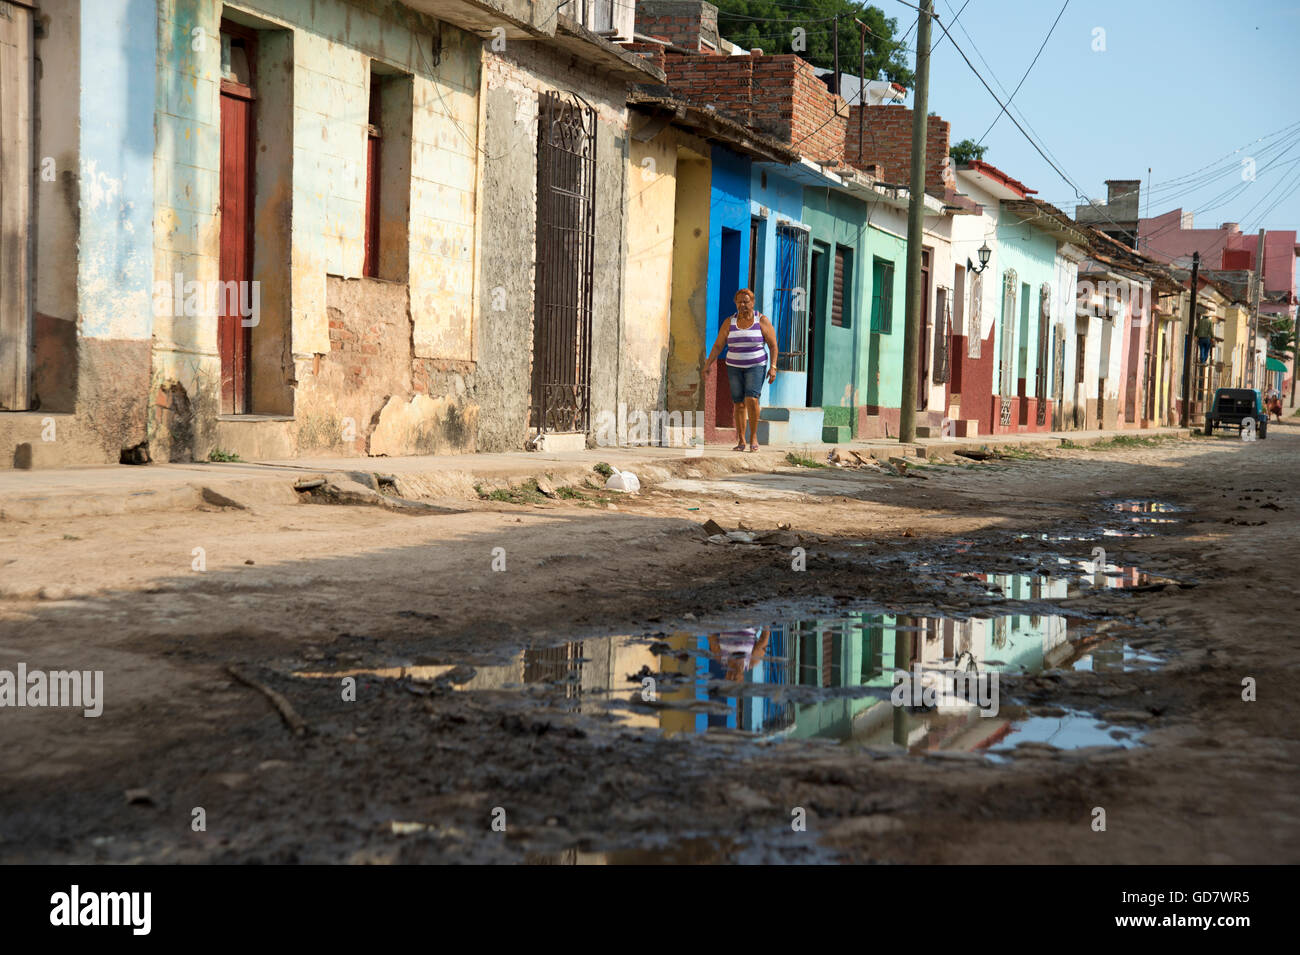 A Cuban woman walks along a neglected street of traditional houses in a rundown area of Trinidad Cuba Stock Photo